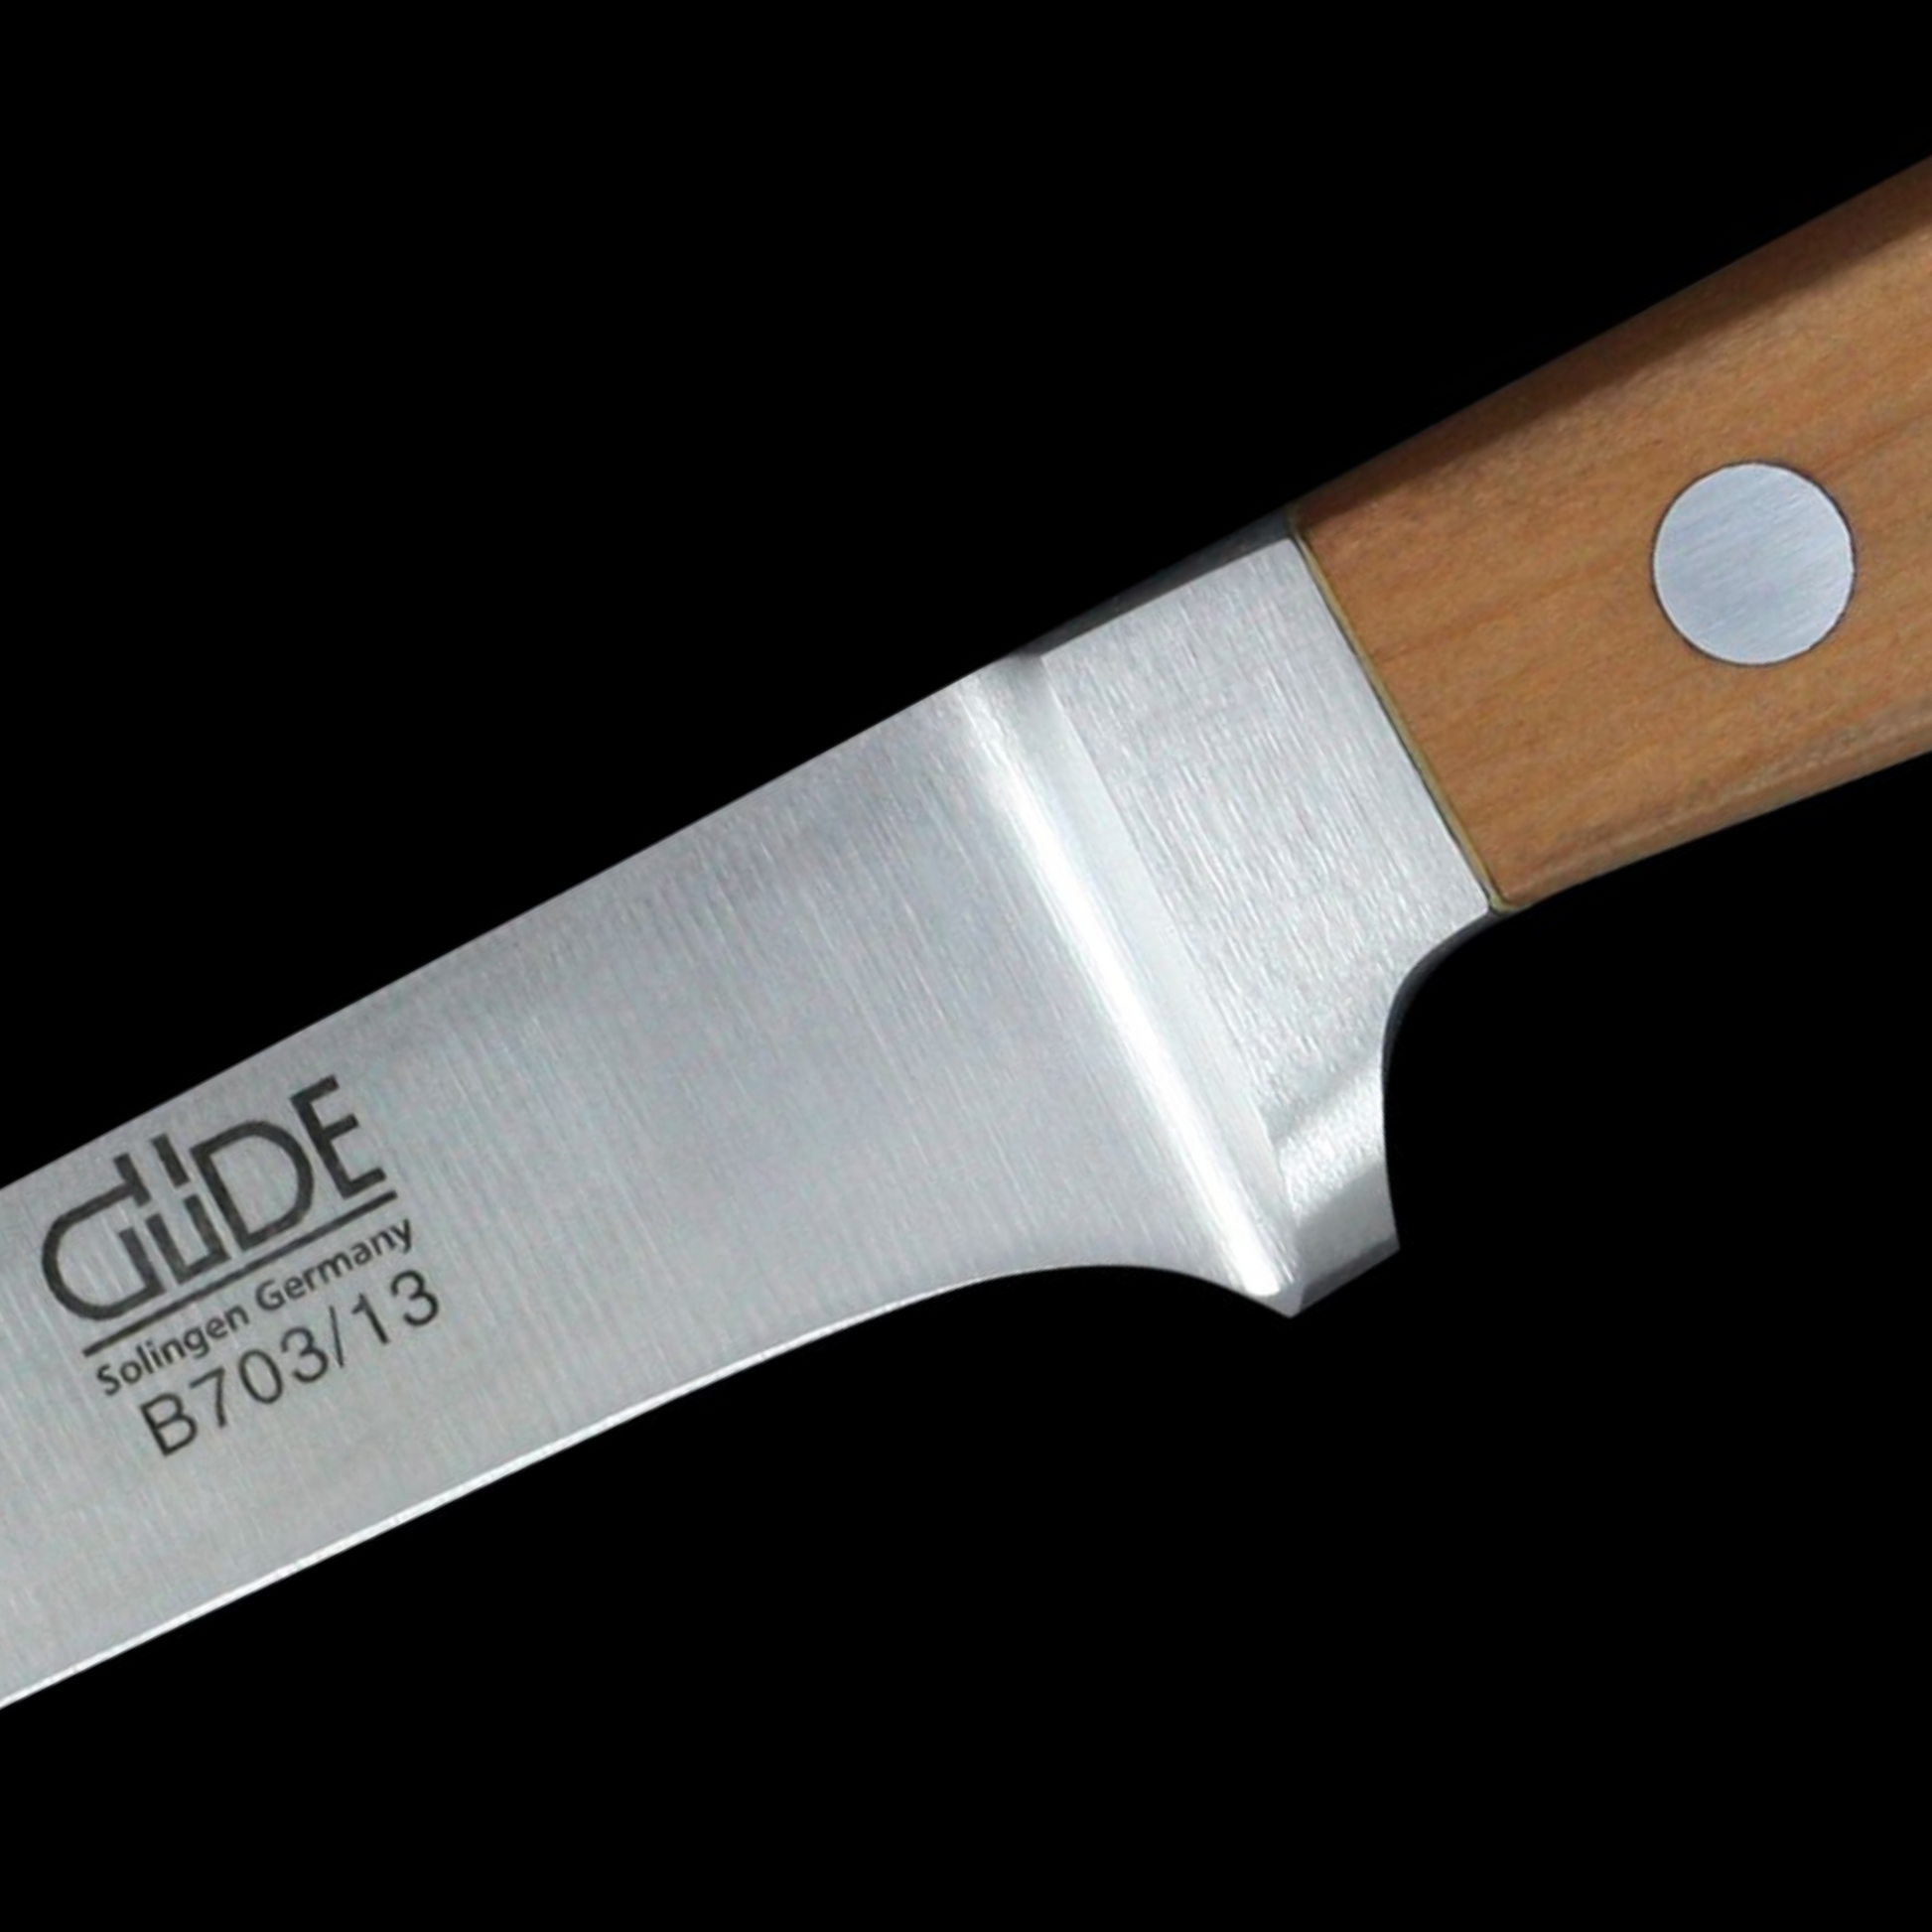 Gude Alpha Birne Series Forged Double Bolster Flexible Boning Knife 5", Pearwood Handle - GuedeUSA